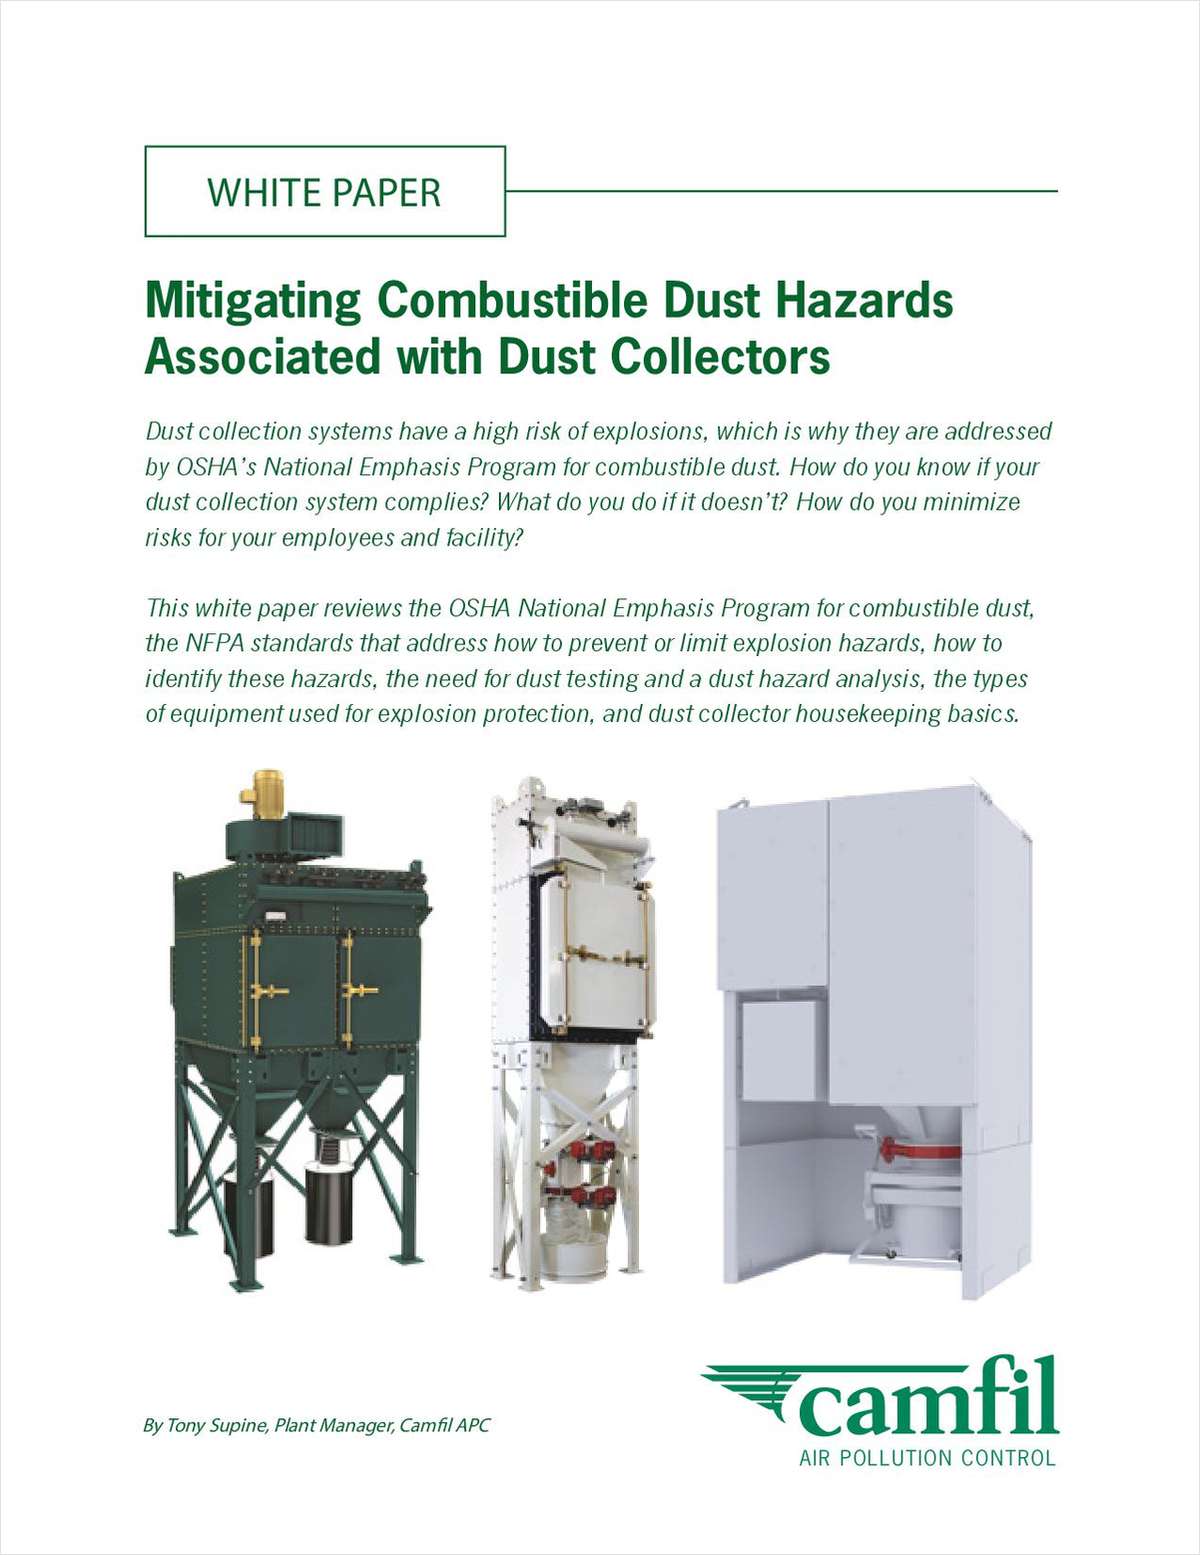 Mitigating Combustible Dust Hazards Associated with Dust Collectors